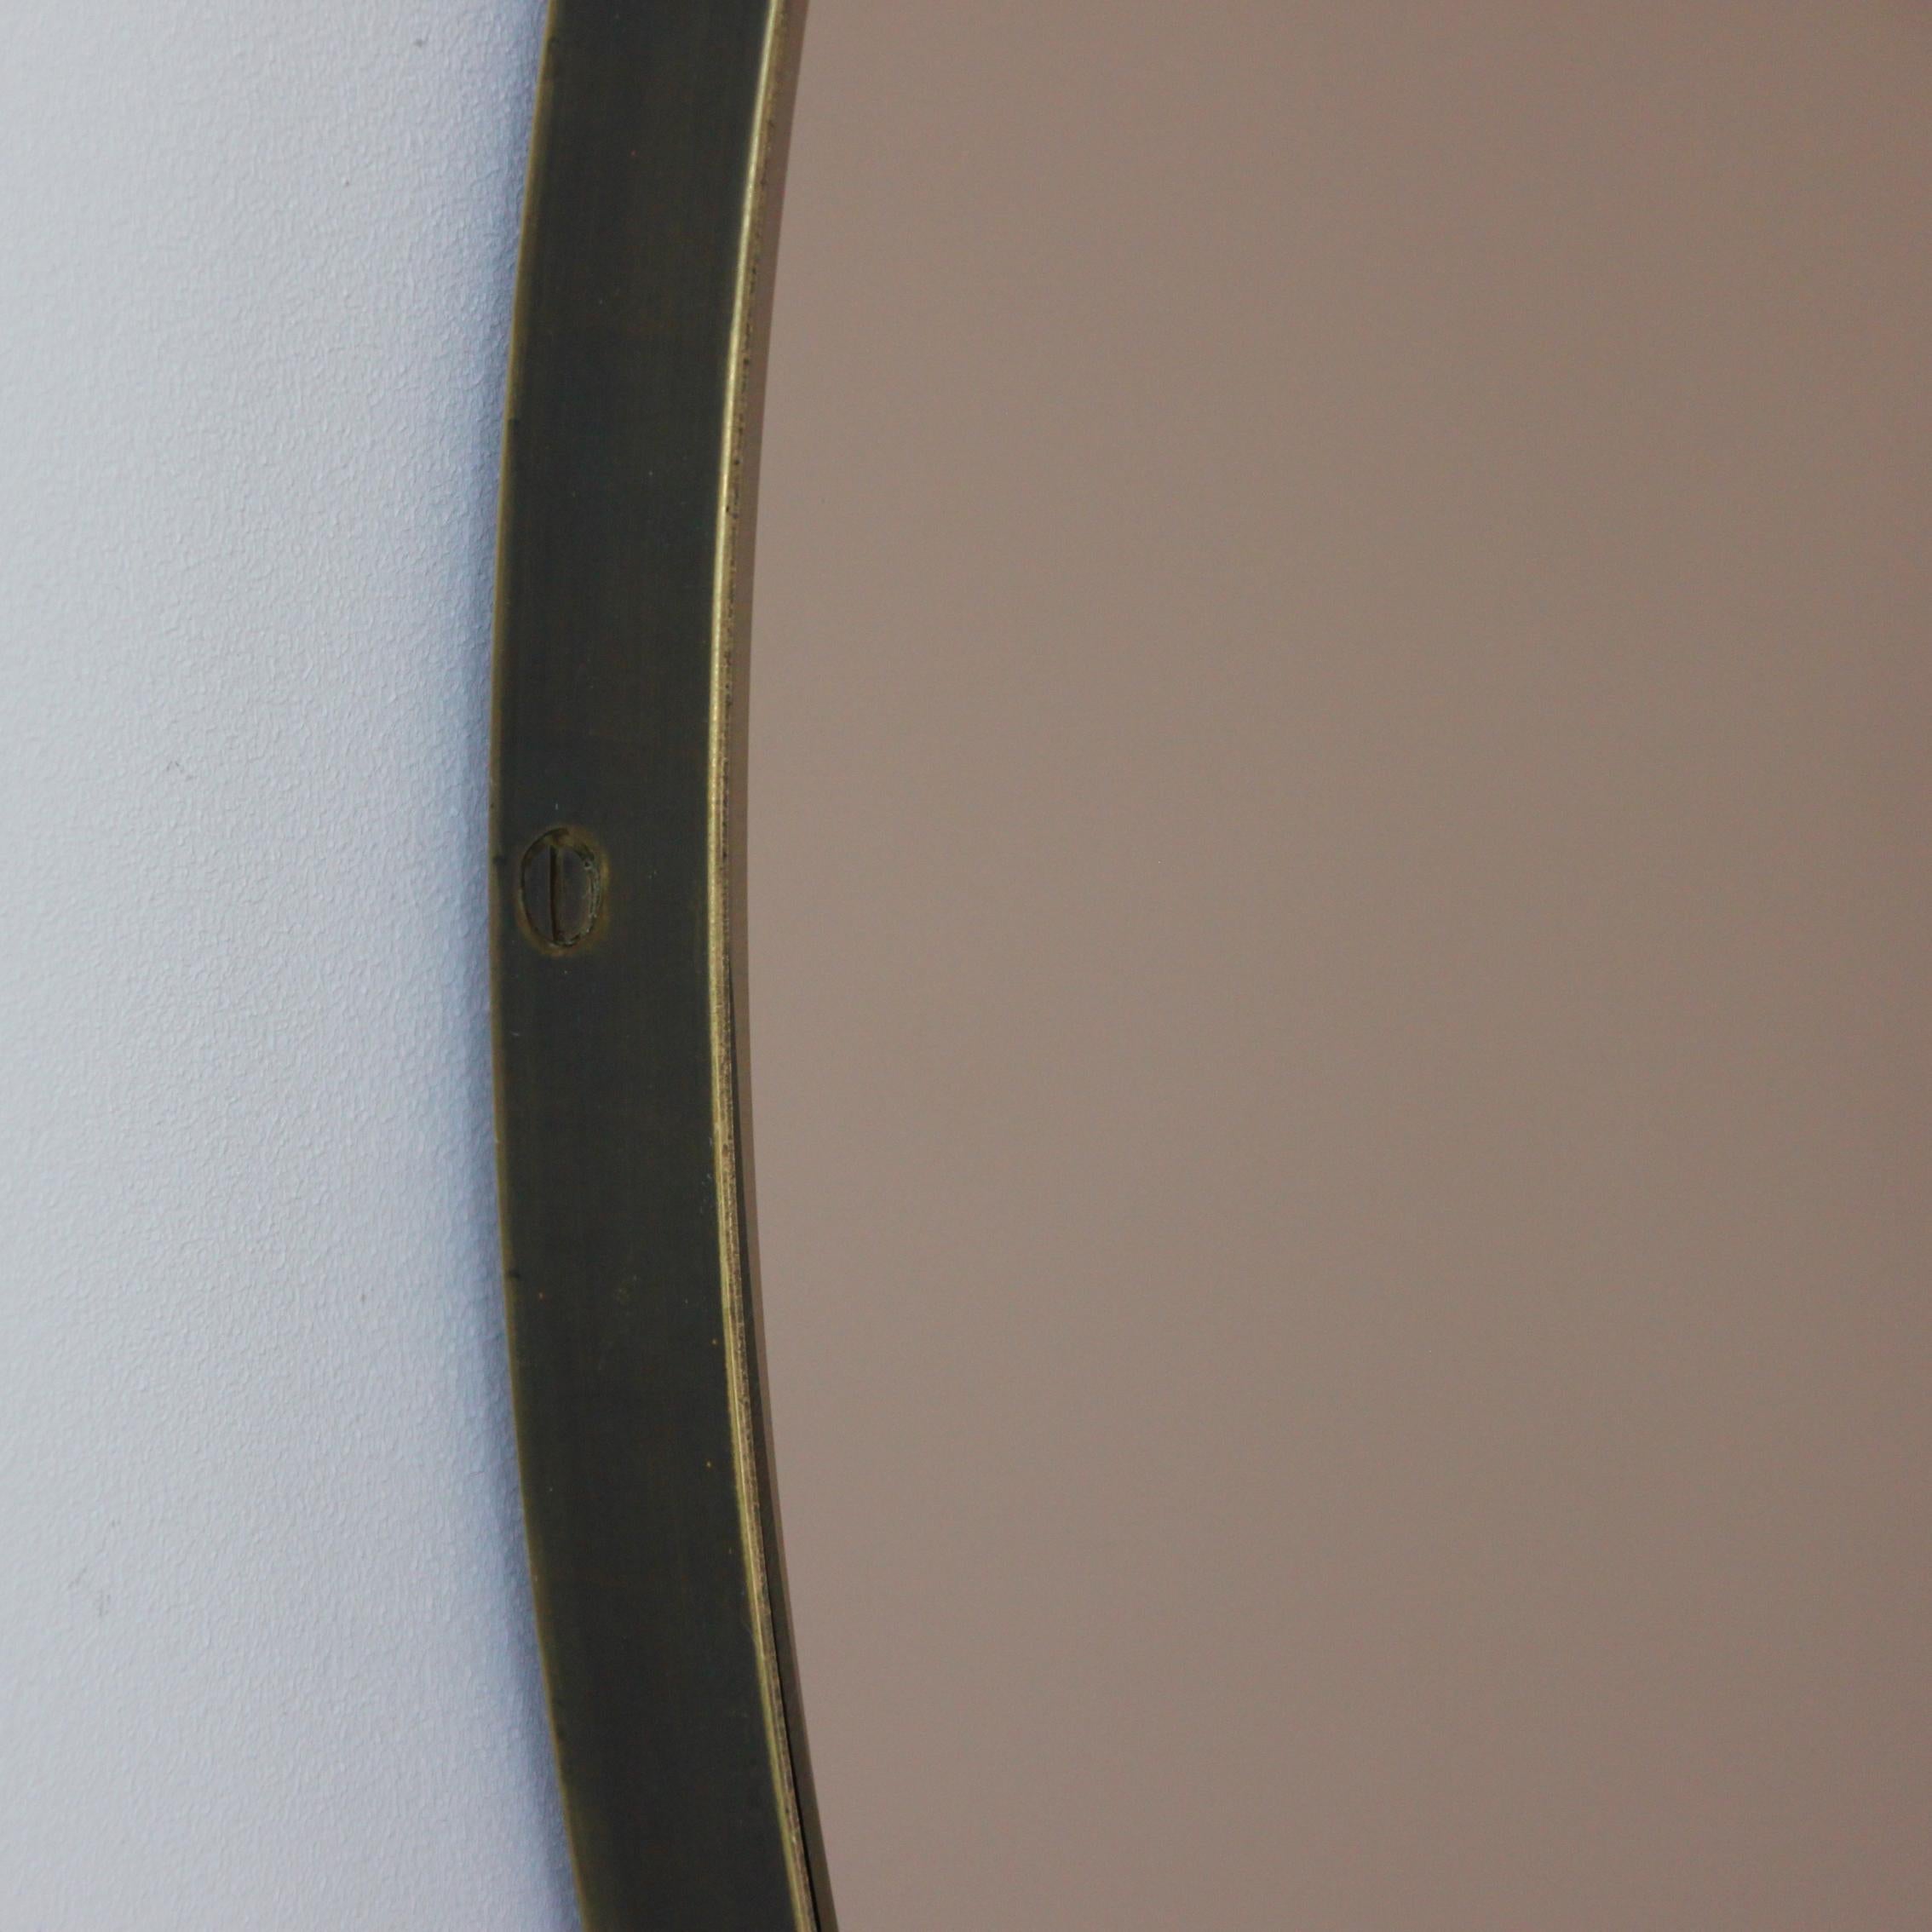 Contemporary bronze tinted Orbis™ round mirror with an elegant brass frame with a bronze patina finish. Designed and handcrafted in London, UK.

Medium, large and extra-large mirrors (60, 80 and 100cm) are fitted with an ingenious French cleat